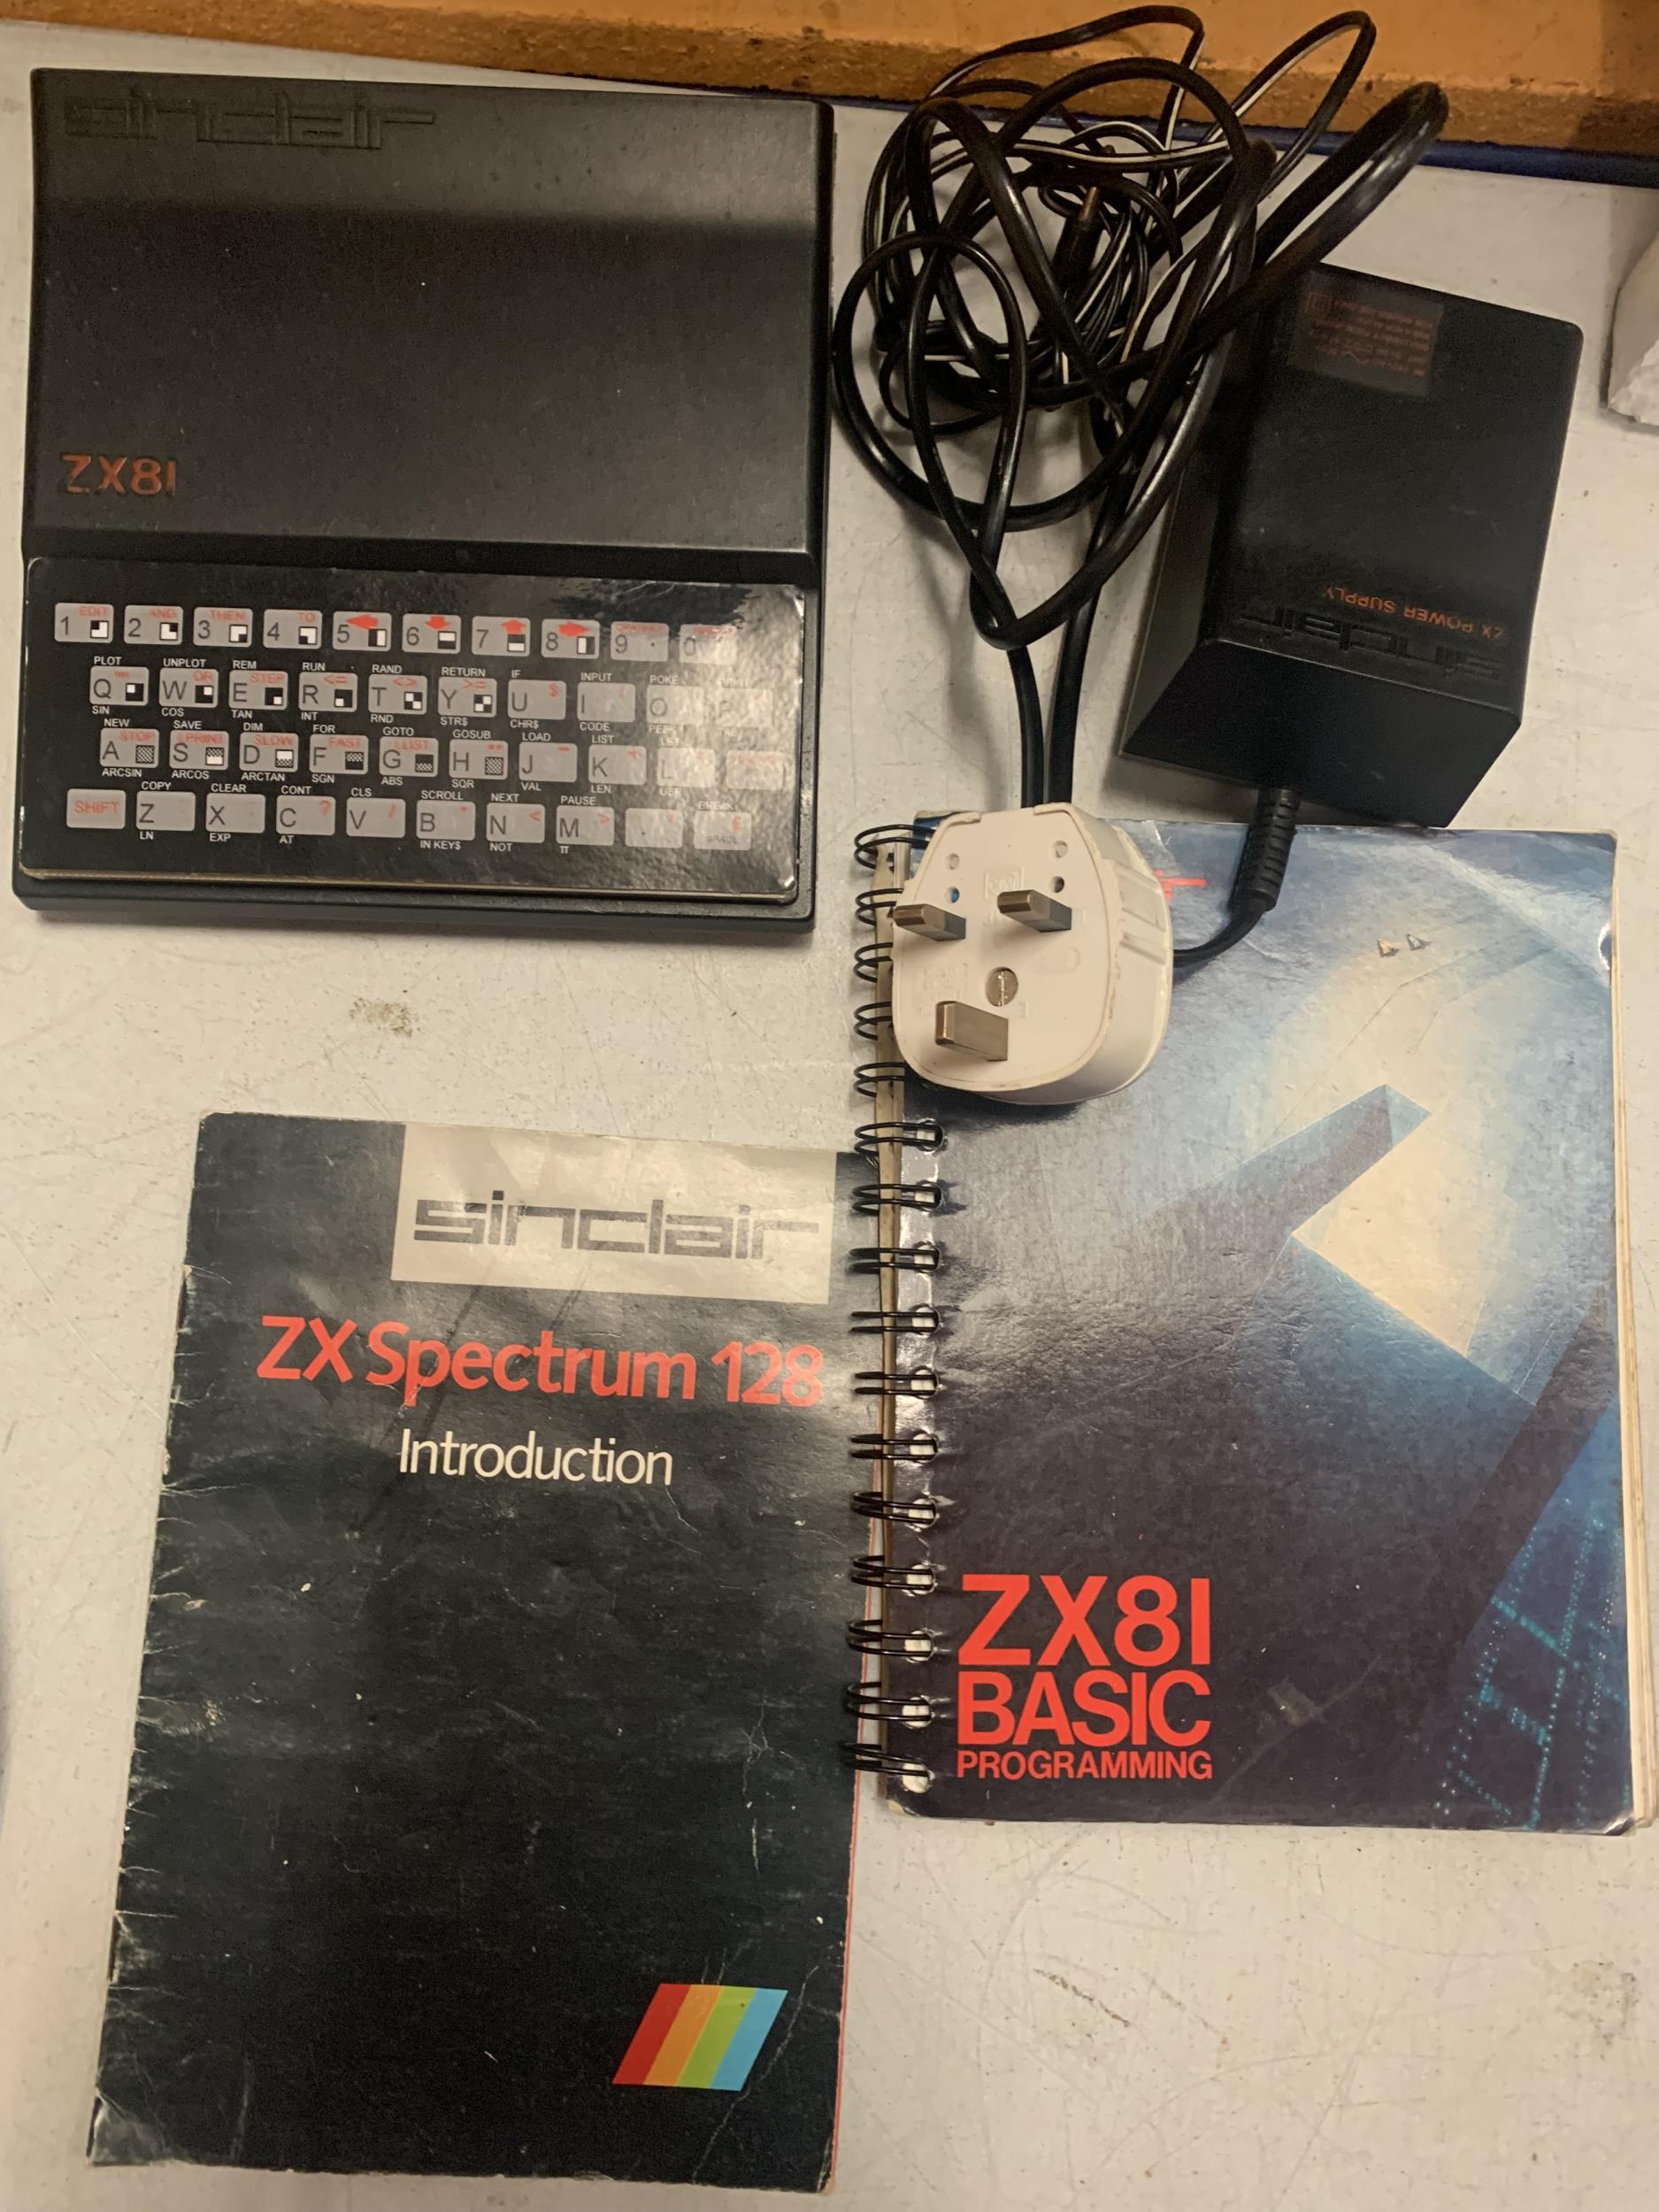 A SINCLAIR ZX81 WITH GUIDES AND POWER SUPPLY